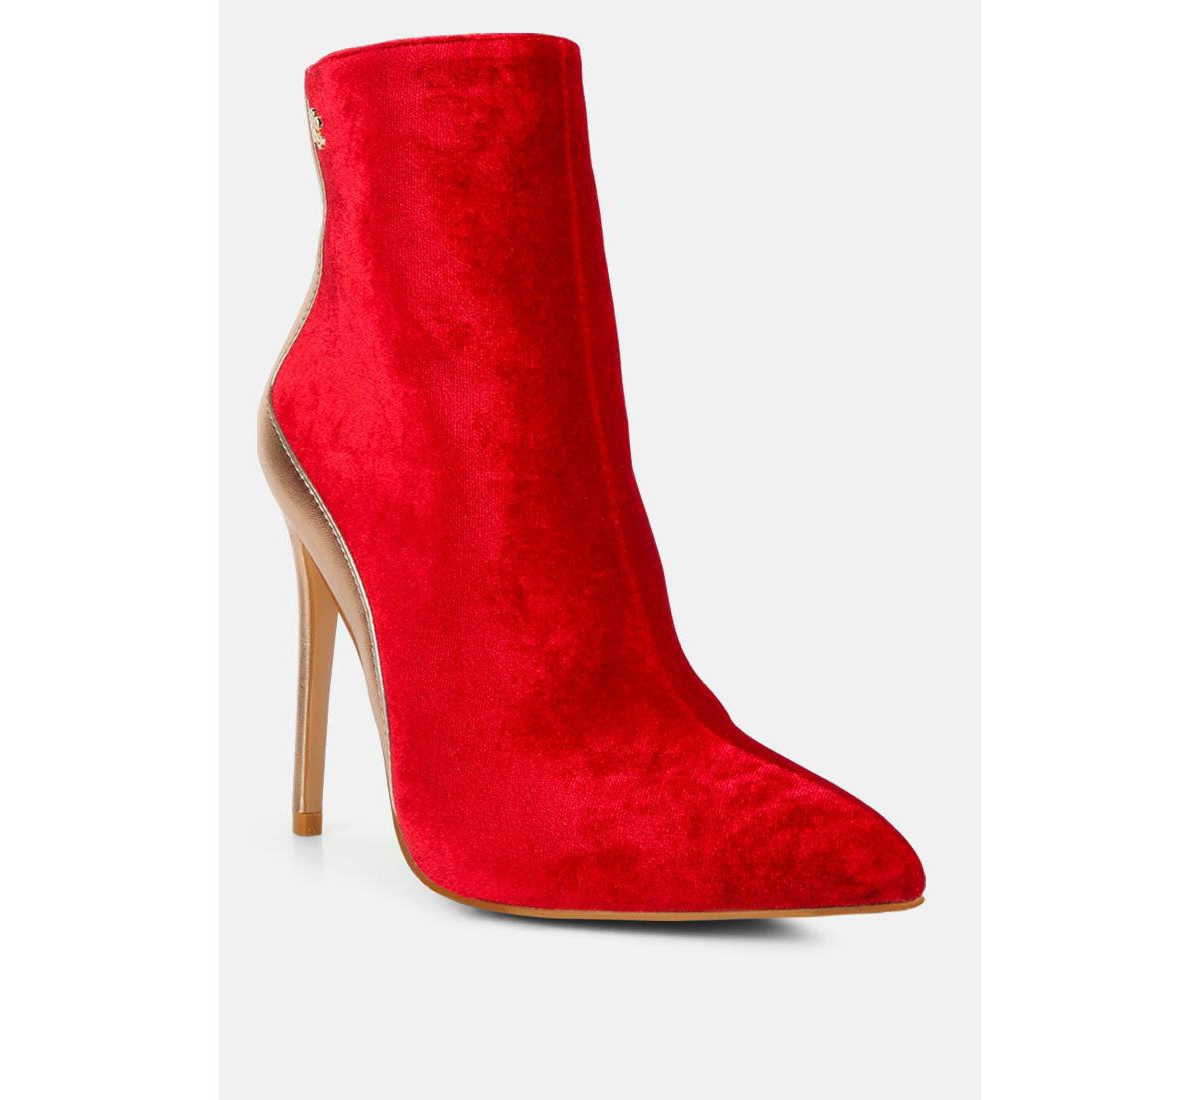 Slade Womens Metallic Highlight High Heeled Ankle Boots - Red/gold